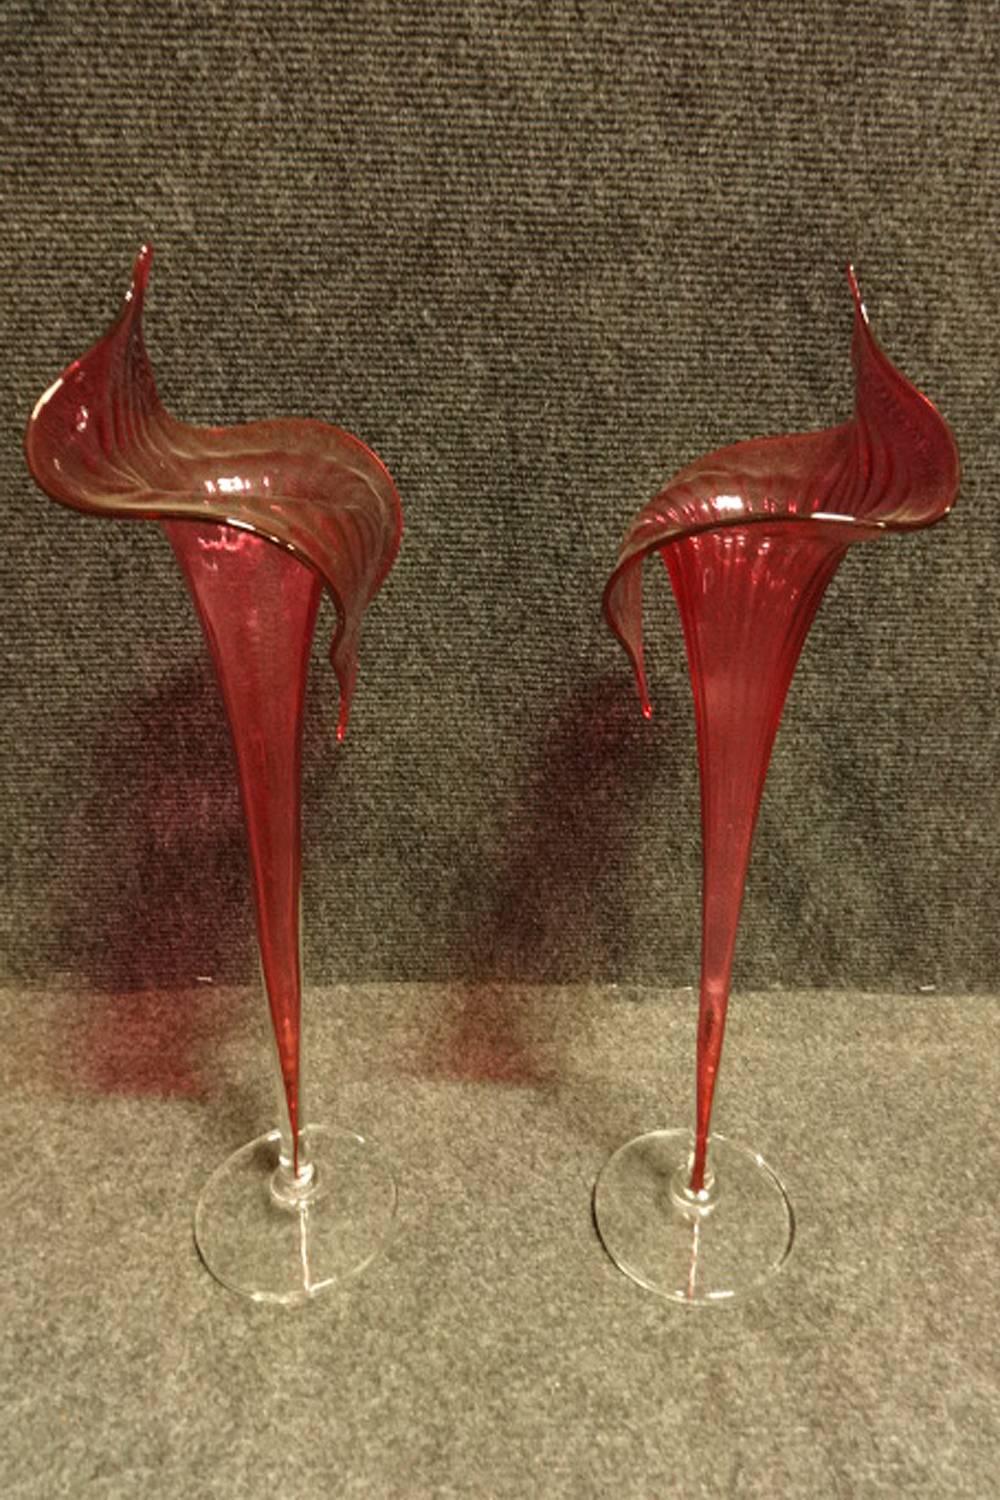 Pair of 'Jack in the Pulpit' Victorian Cranberry Vases In Excellent Condition For Sale In Applyby Magna, Staffordshire